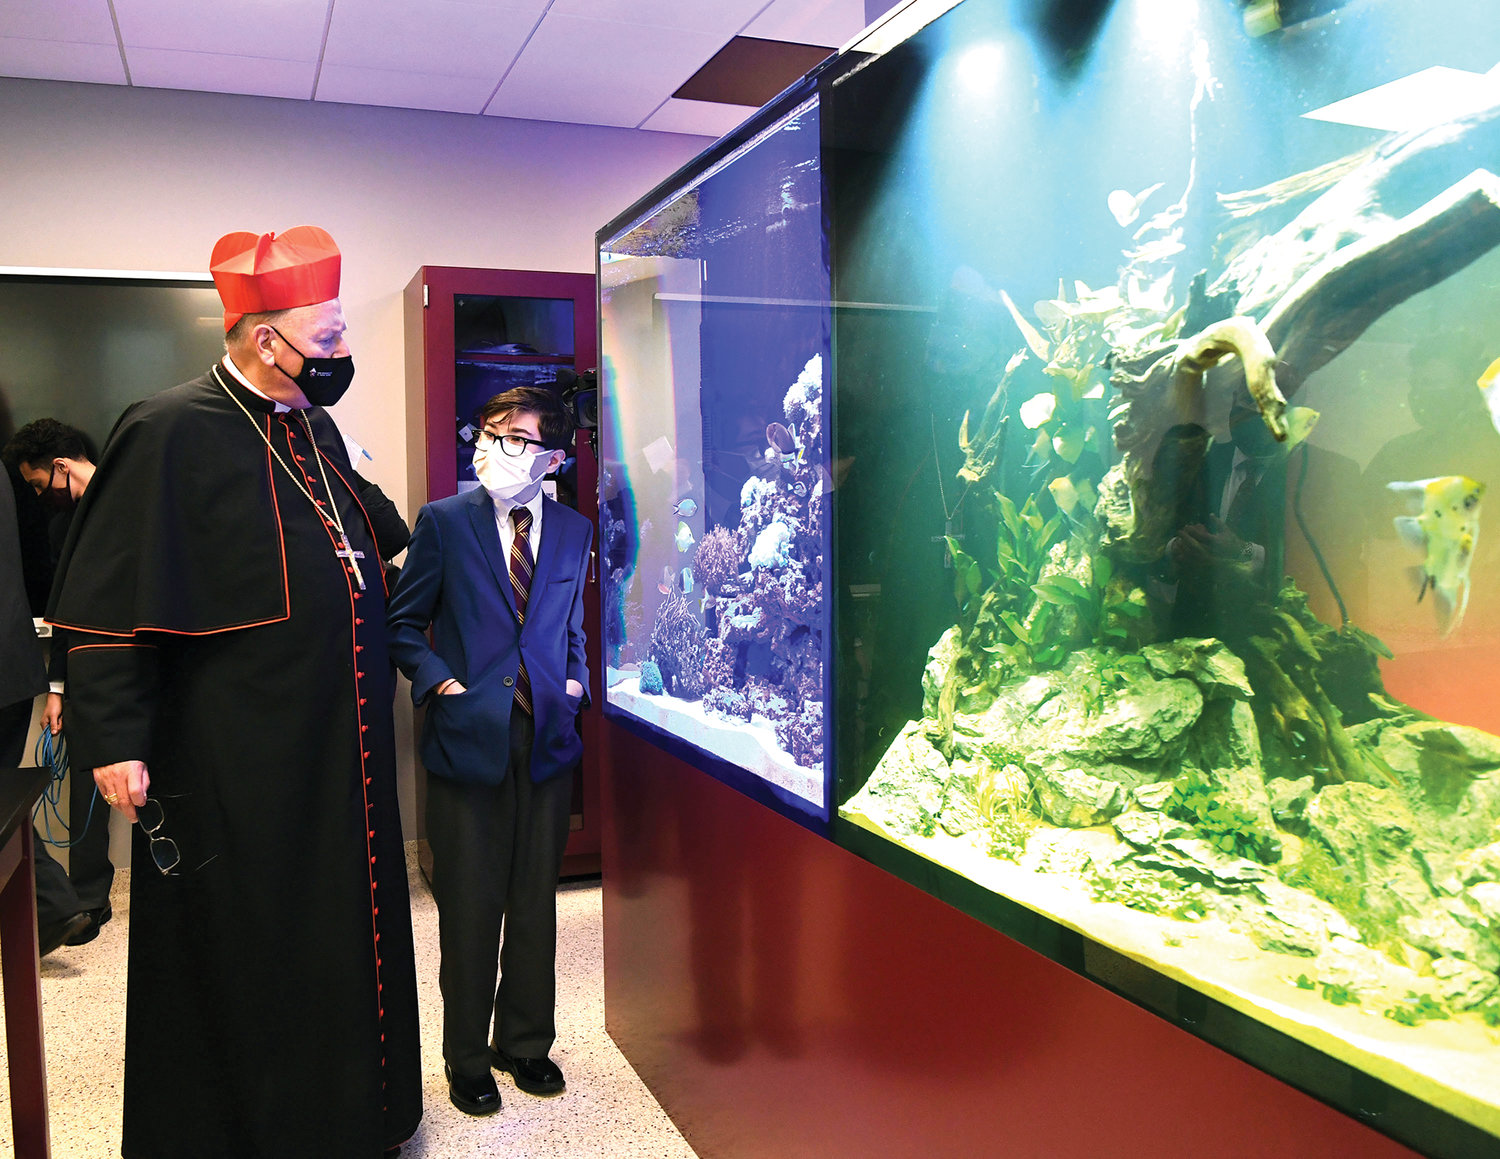 Cardinal Dolan looks at two new tanks: a tropical saltwater coral ecosystem and a freshwater environment in the new biology laboratory.